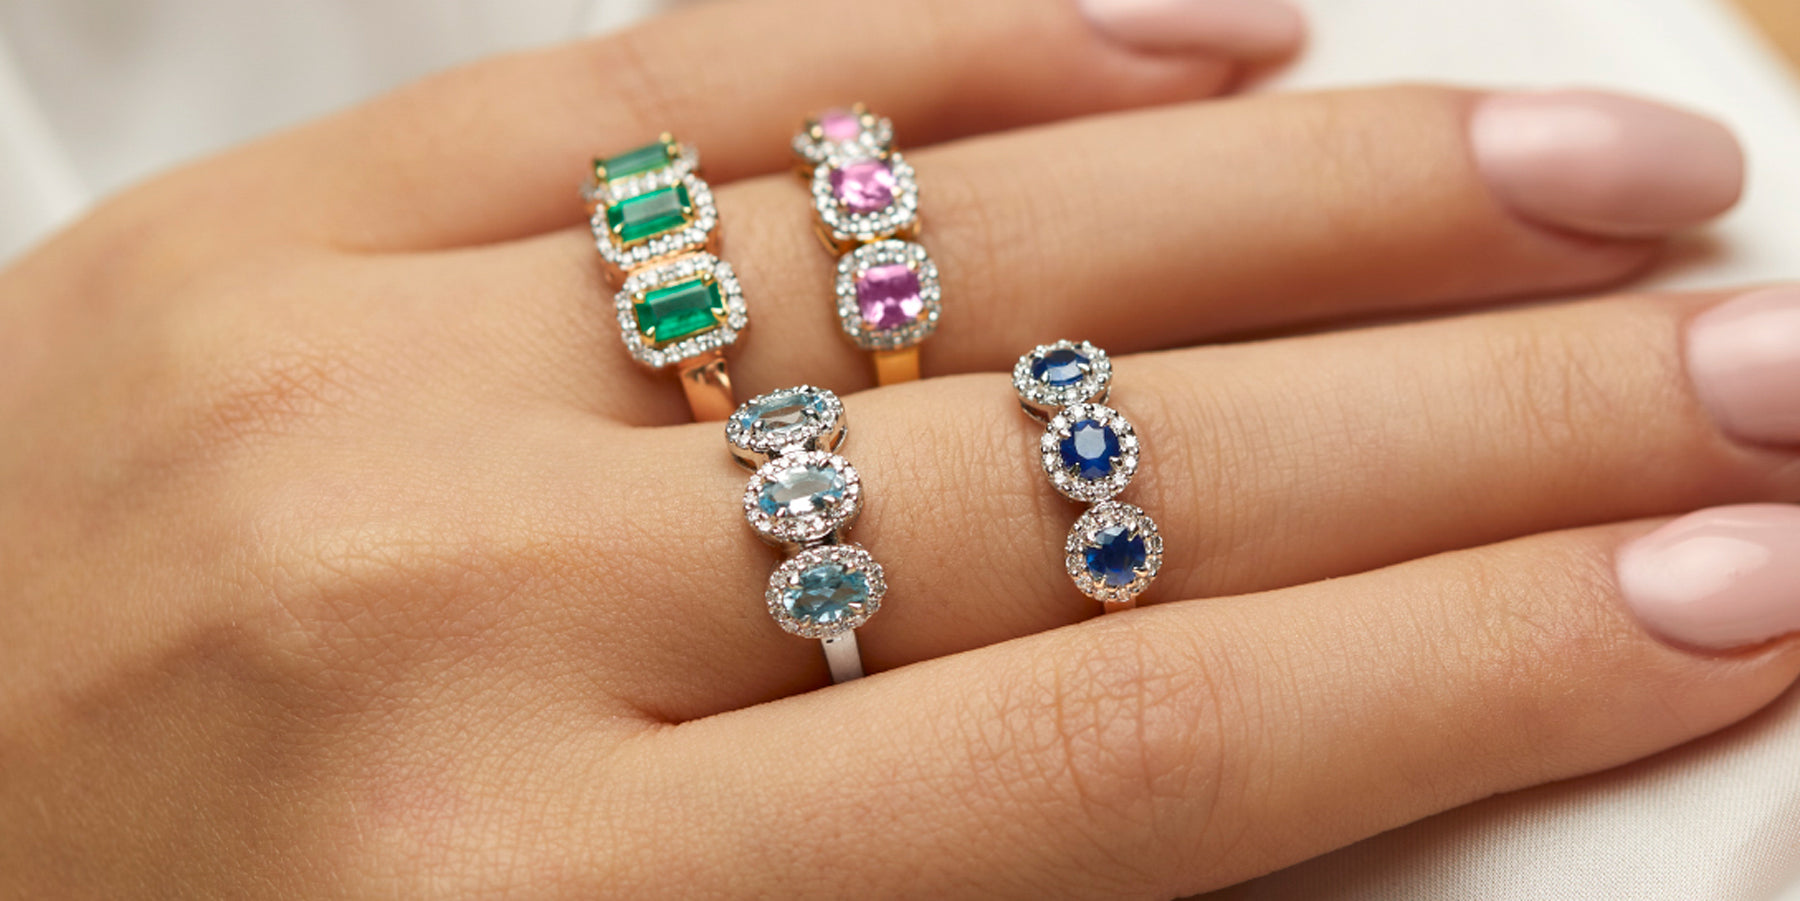 Mother's Day Gift Ideas | Emerald, Pink Sapphire, Blue Sapphire and Aquamarine Garland Ring from Fenton